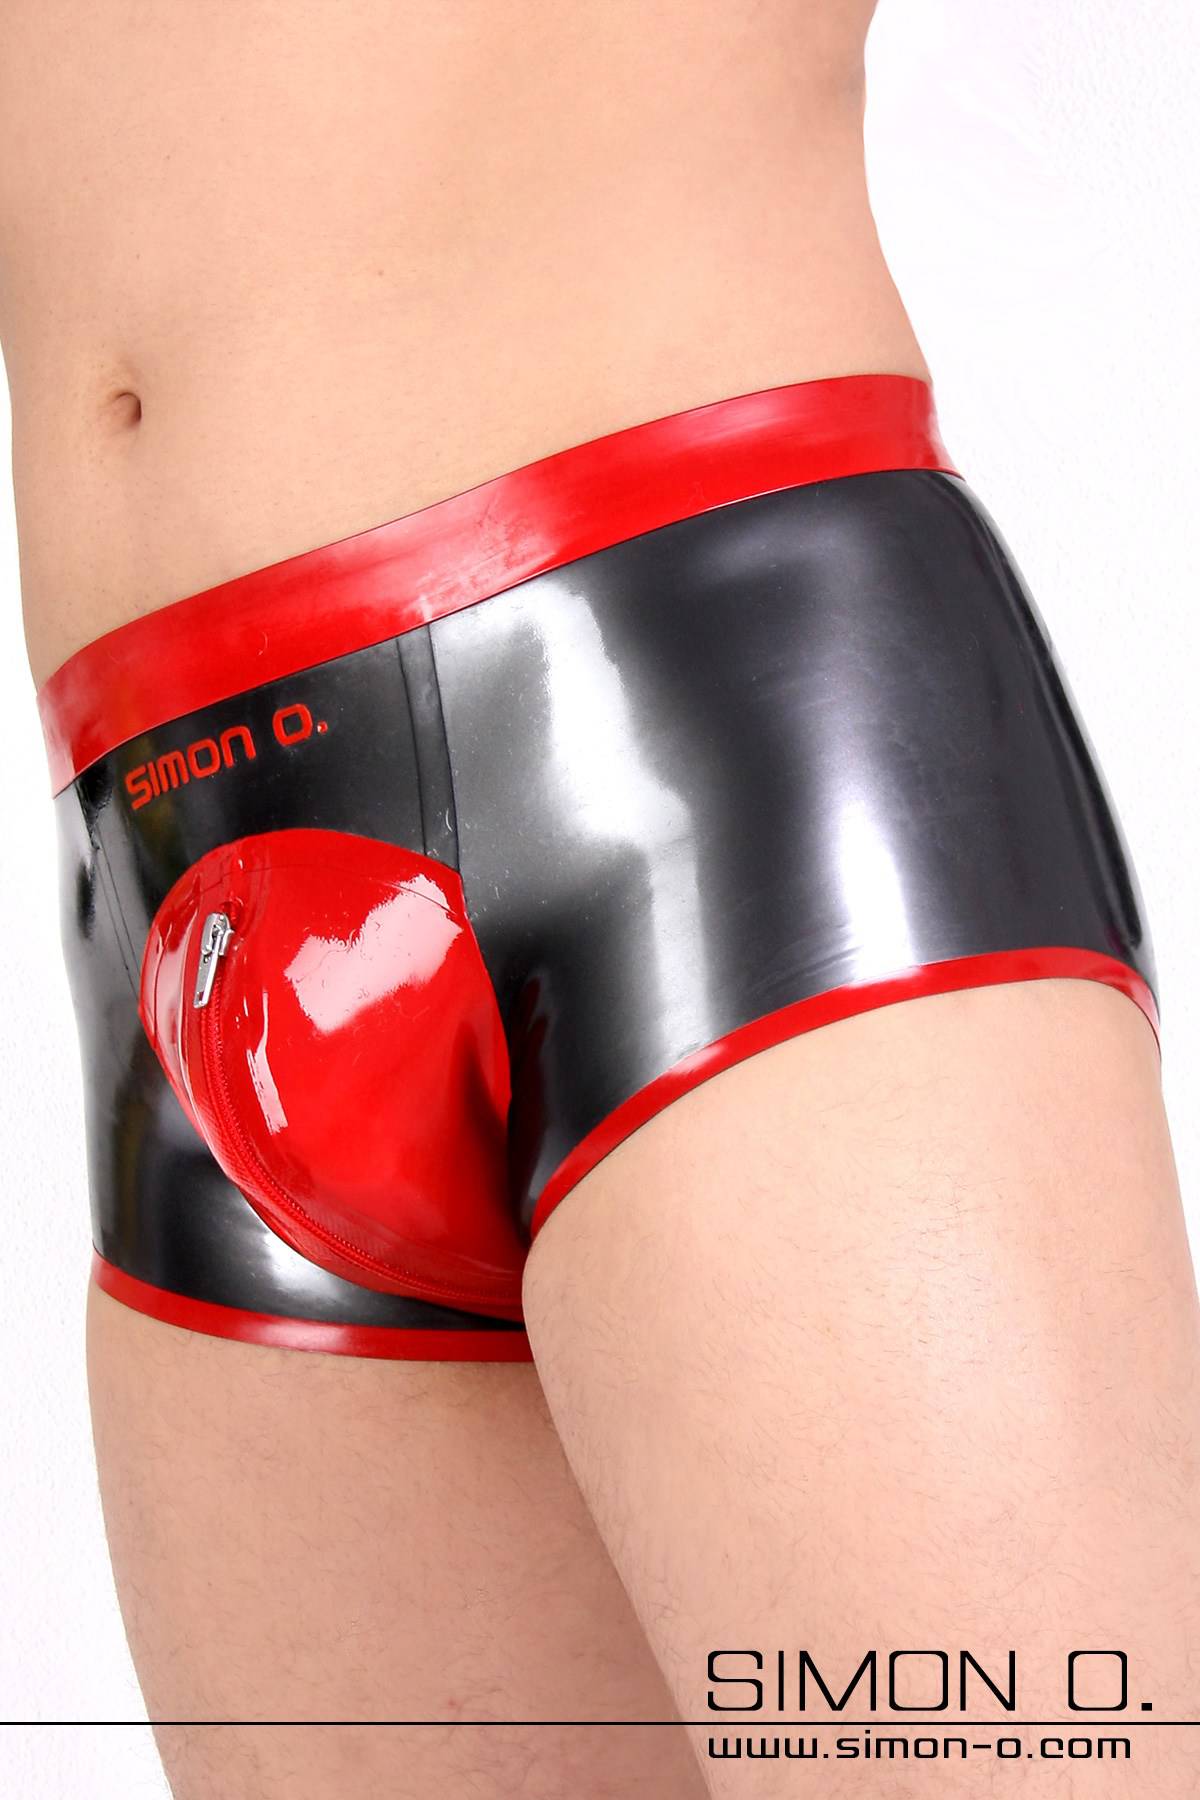 A man wears a shiny men's latex shorts with zipper in the crotch area, in the color metallic grey combined with red.